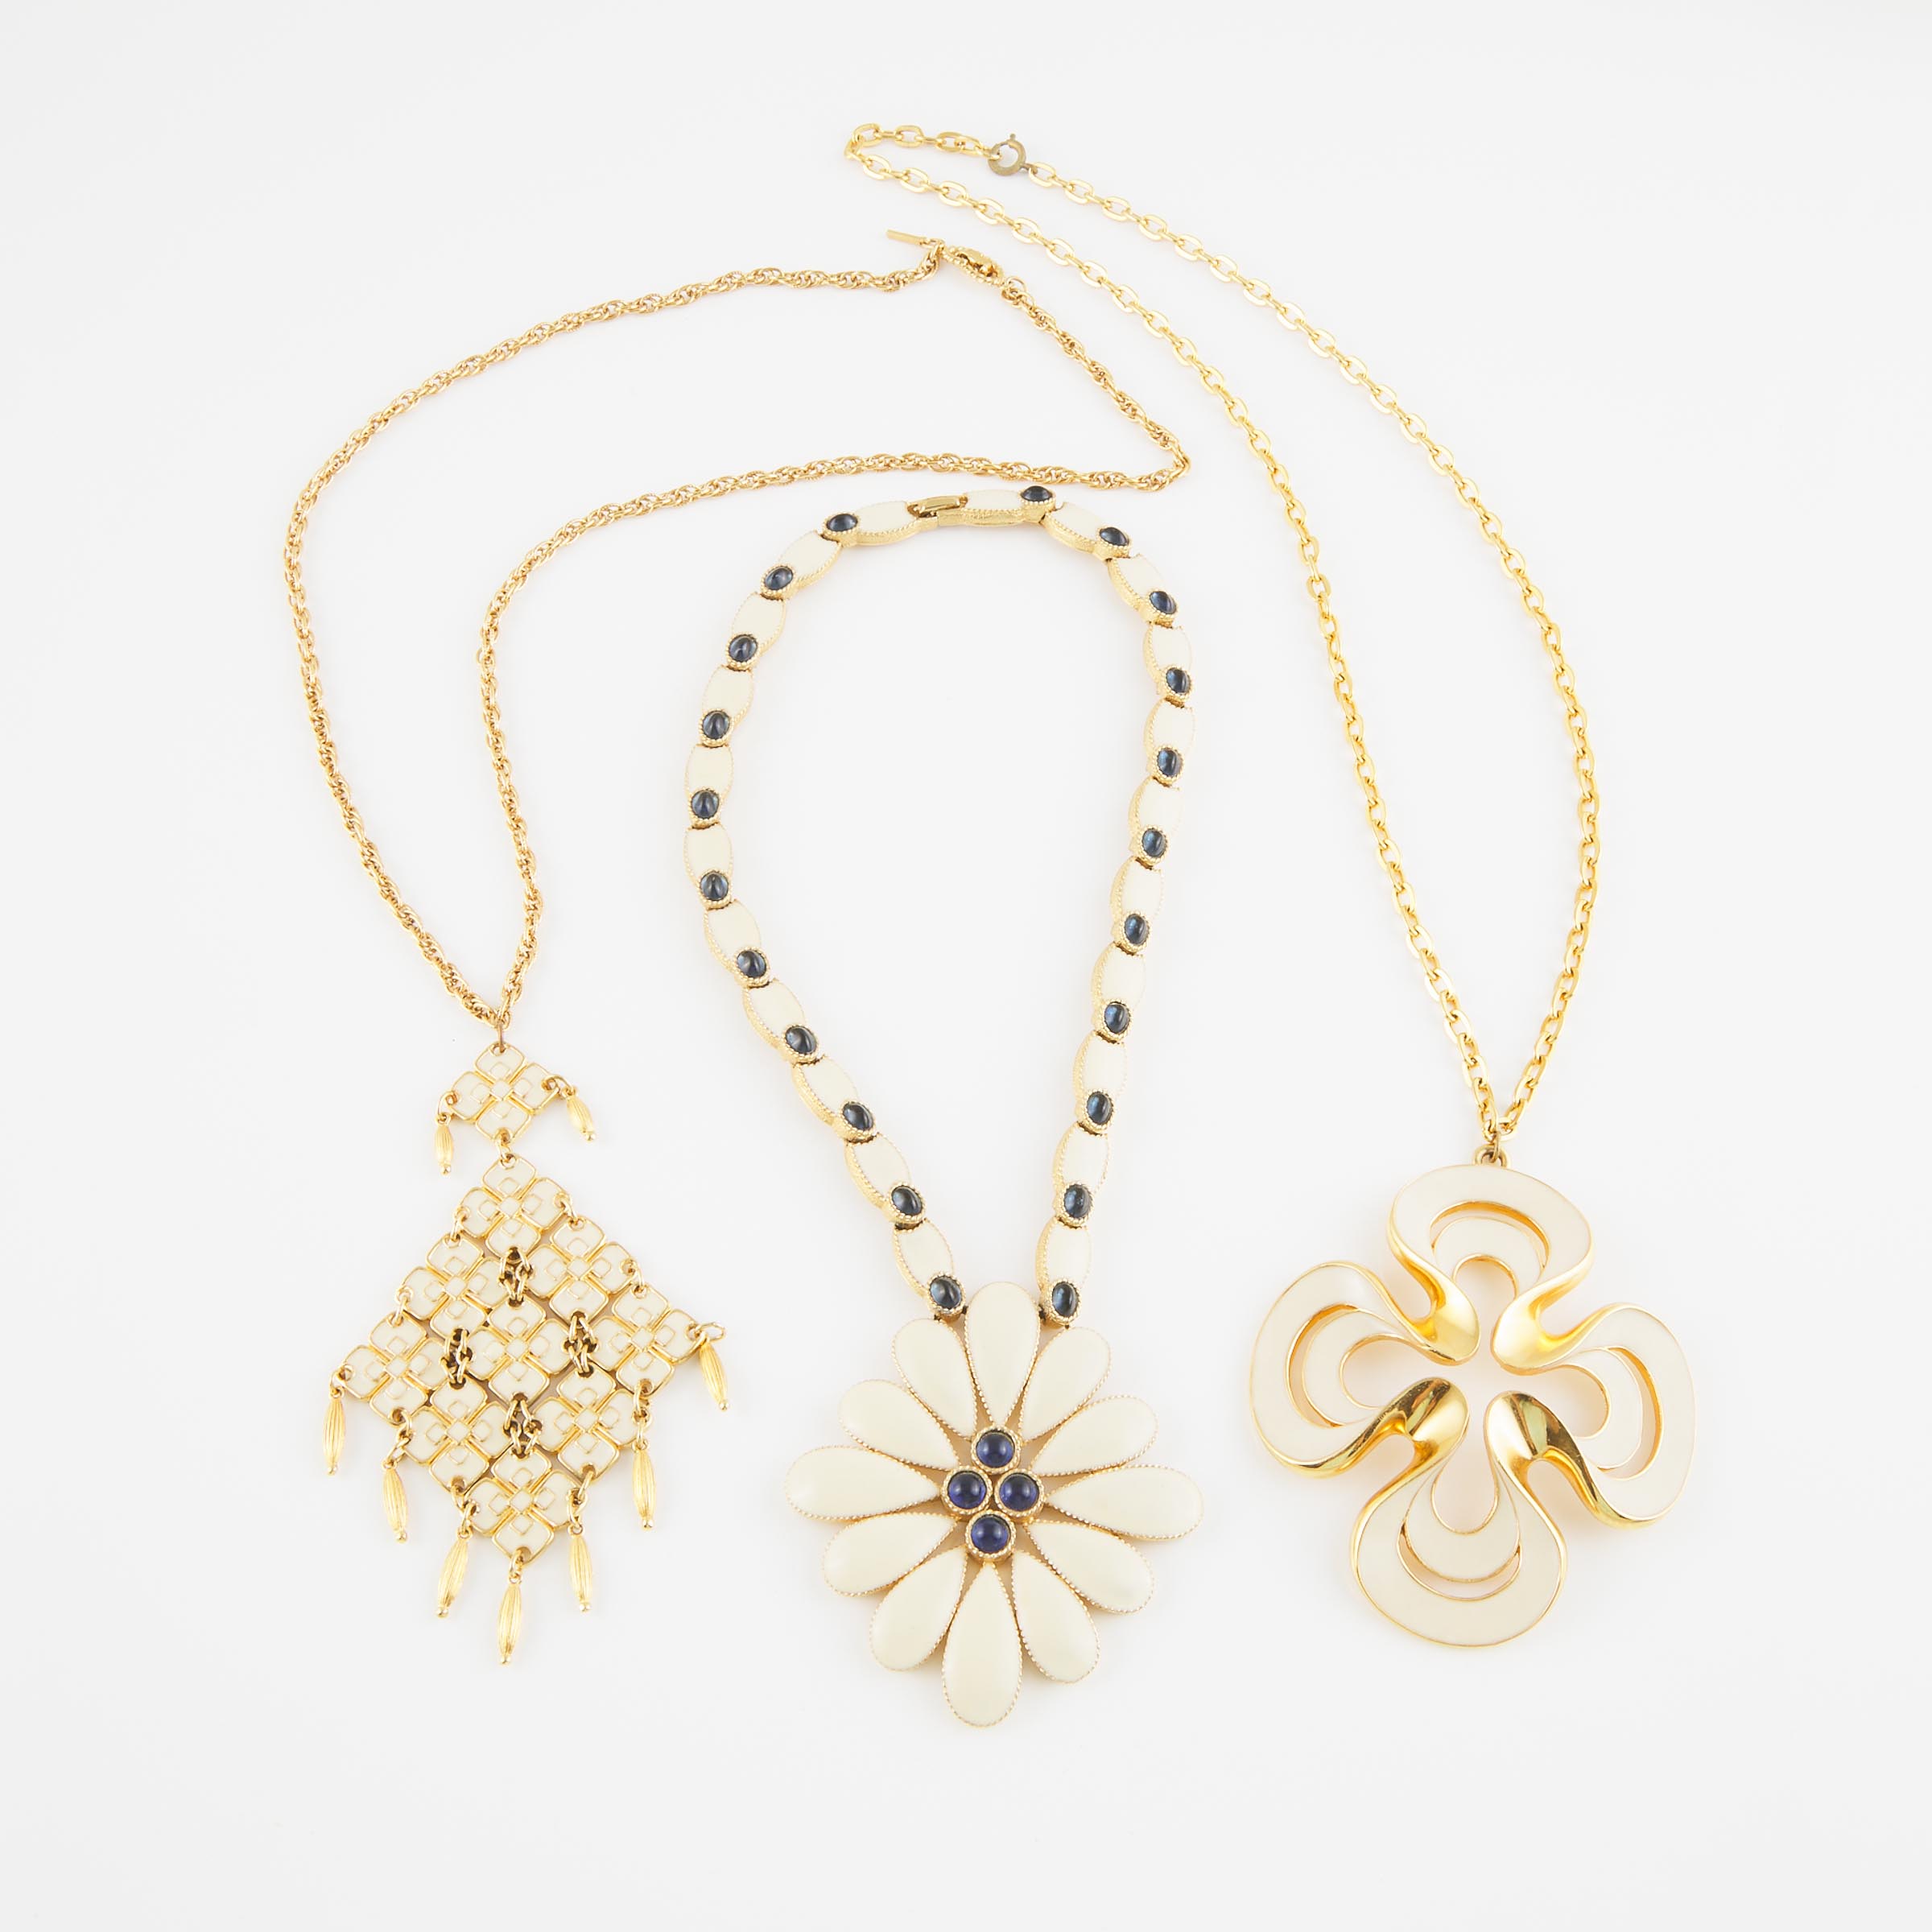 3 D'Orlan Gold-Tone Metal And Enamelled Necklaces